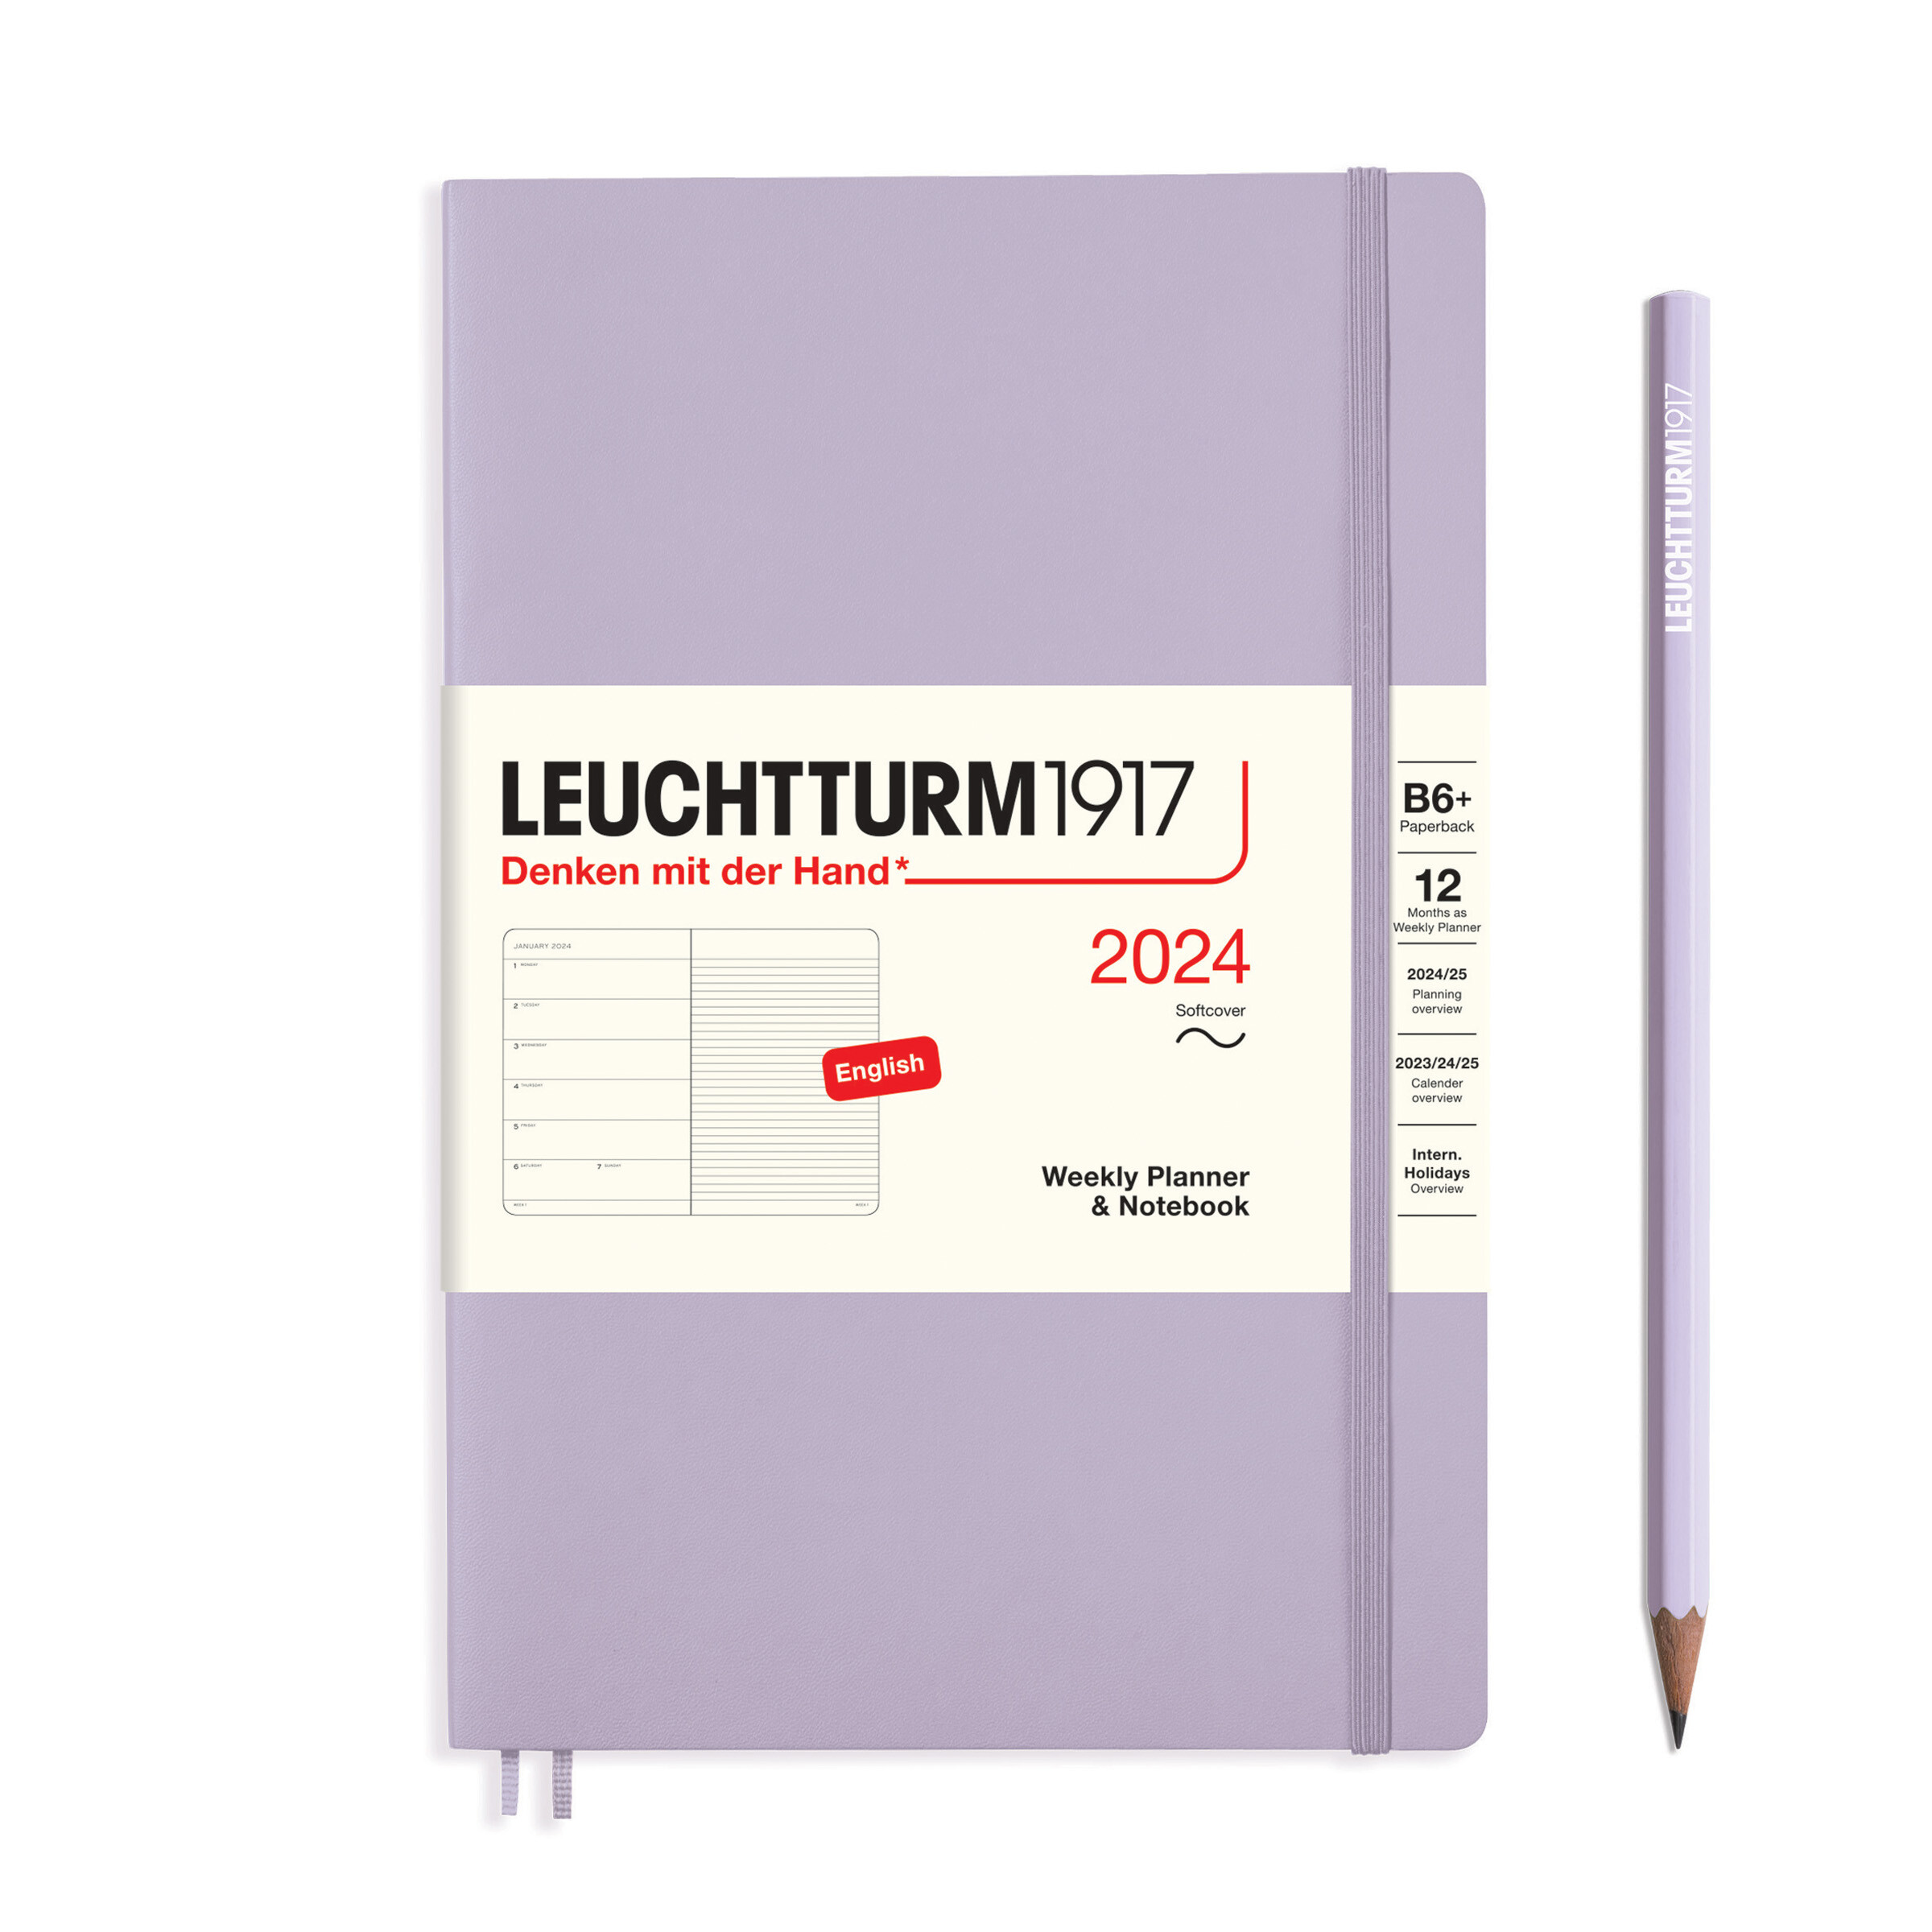 Leuchtturm1917 Weekly Planner & Notebook Soft Cover B6+ 2024 - Pencraft the boutique